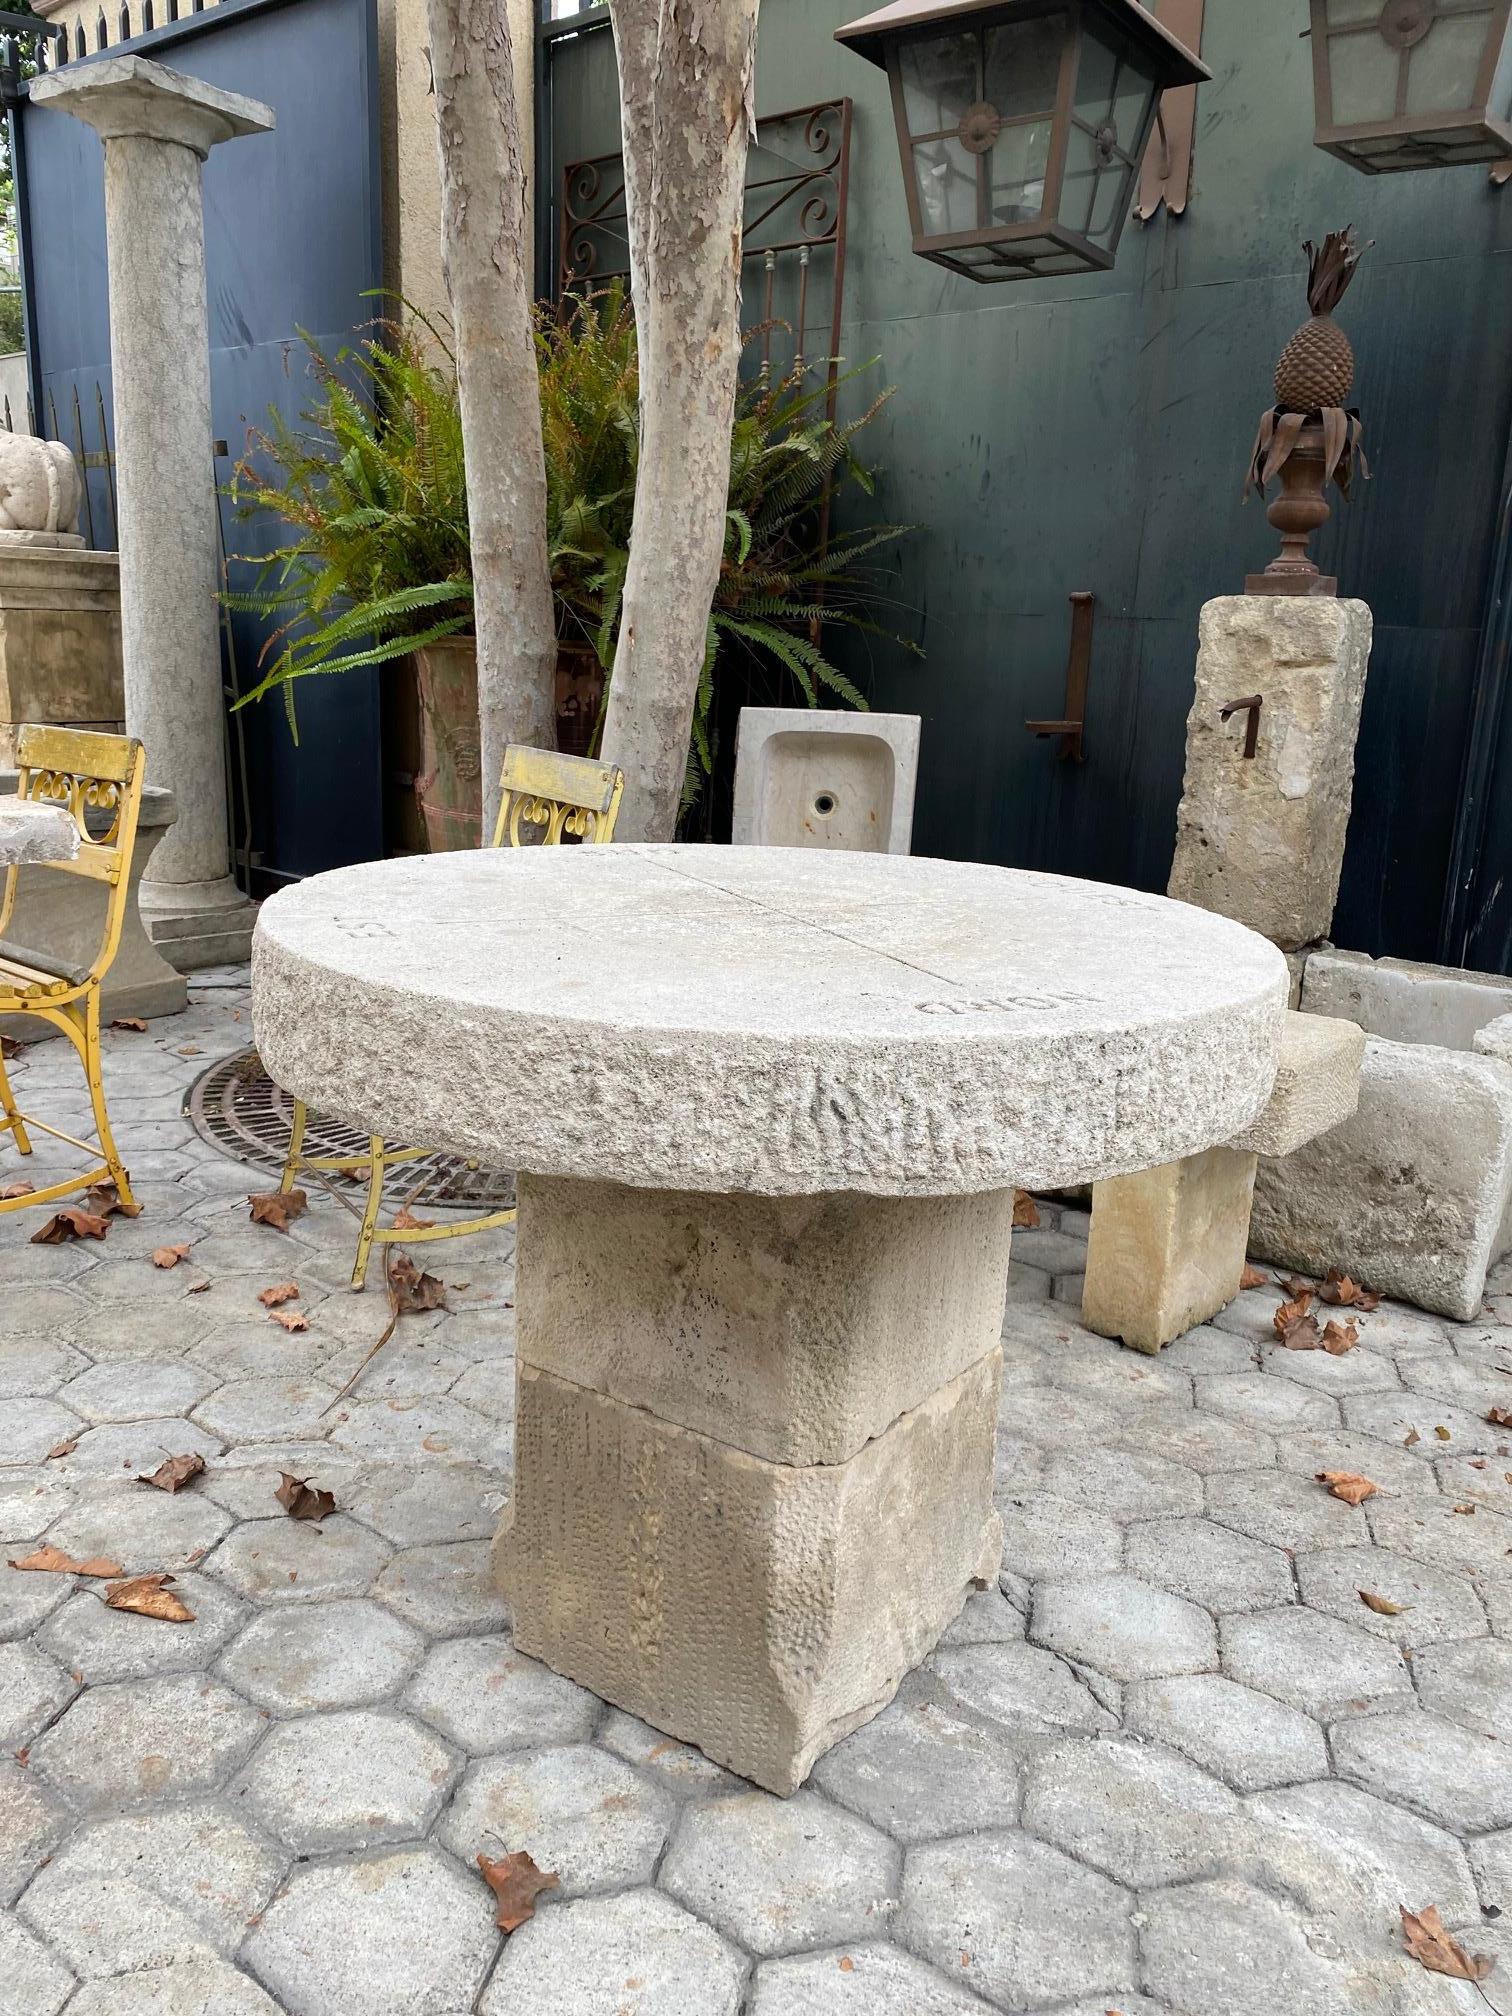 18th century hand carved round stone antique garden patio coffee outdoor indoor table for two or four with an earlier Gothic stone pedestal base. It will be the perfect touch by an outdoor fireplace or on the patio next to your bedroom to have the